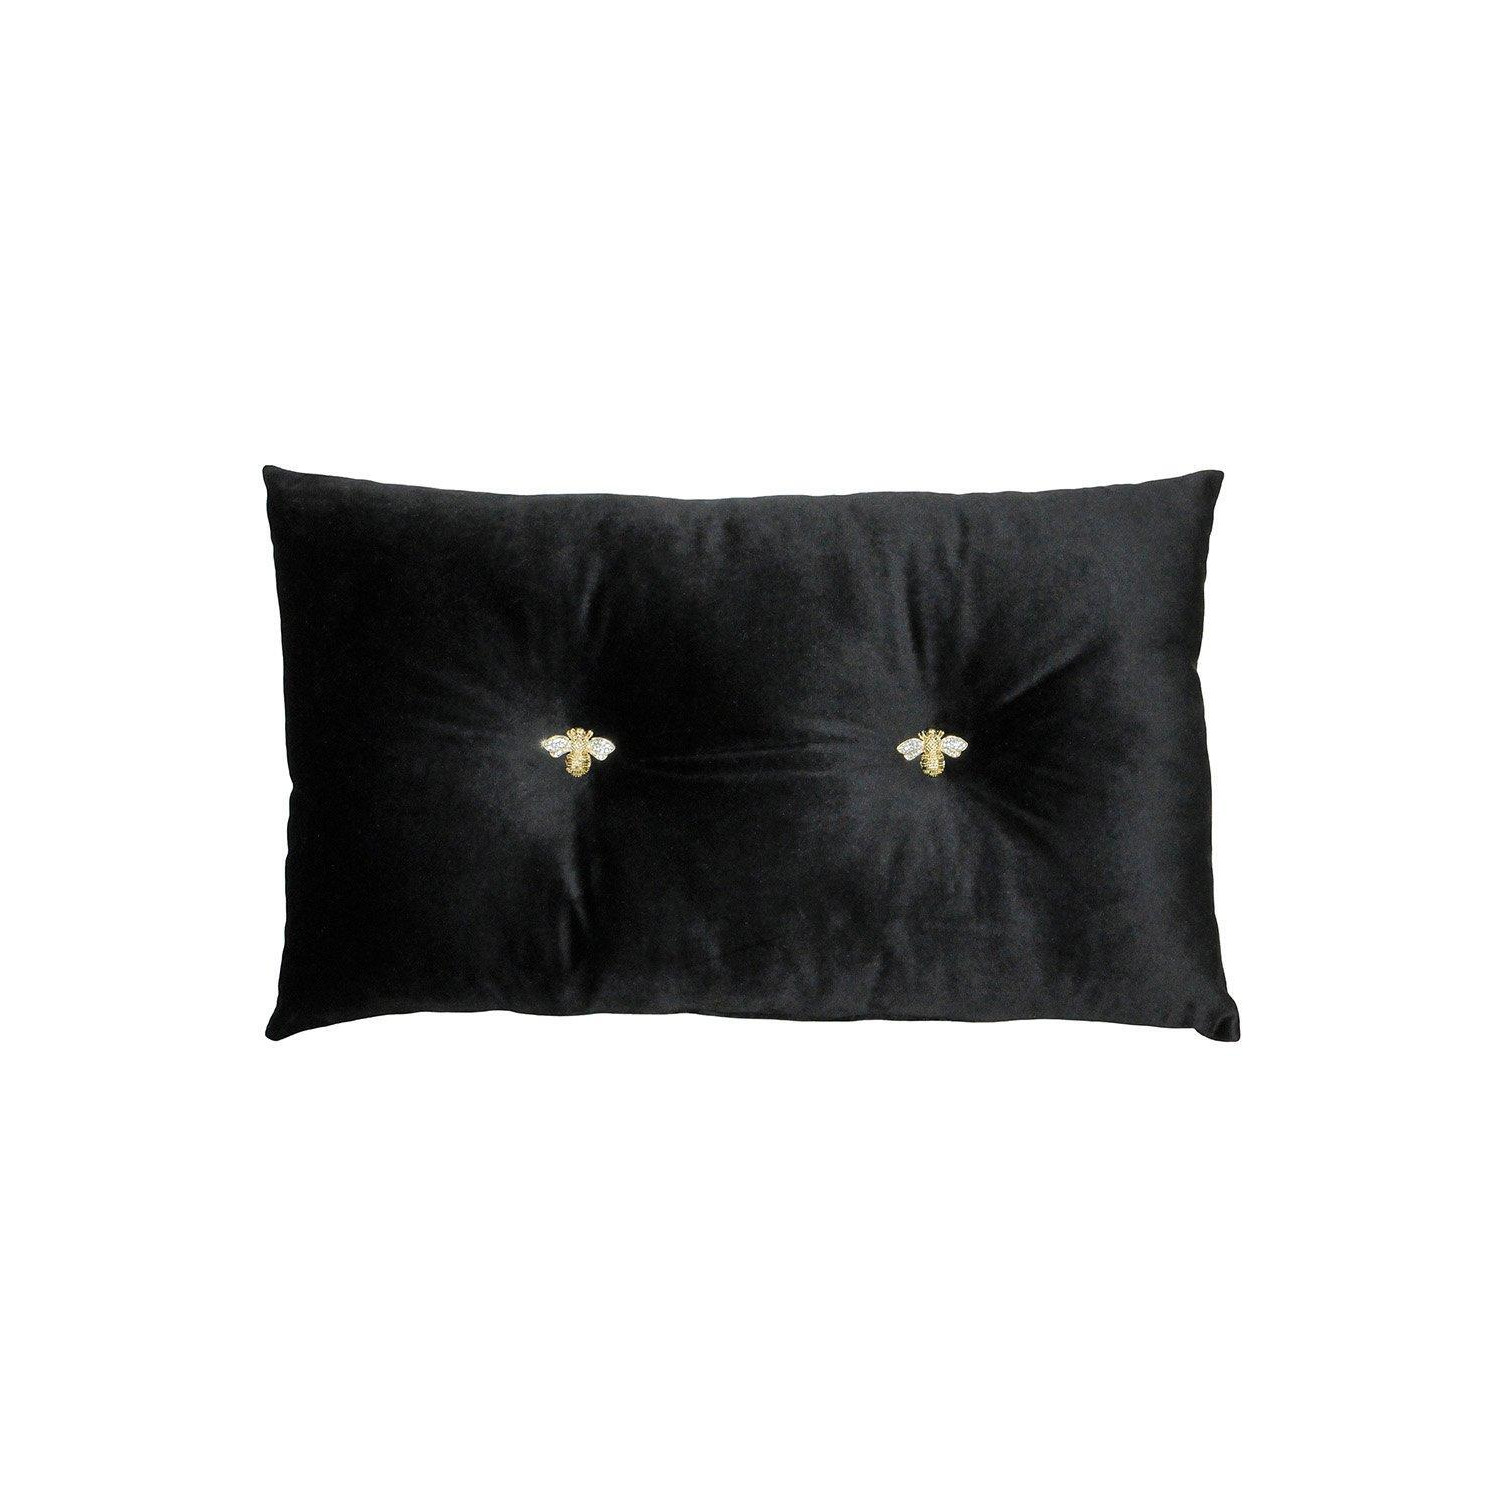 Bumble Bee Embroidered Buttoned Velvet Ready Filled Cushion